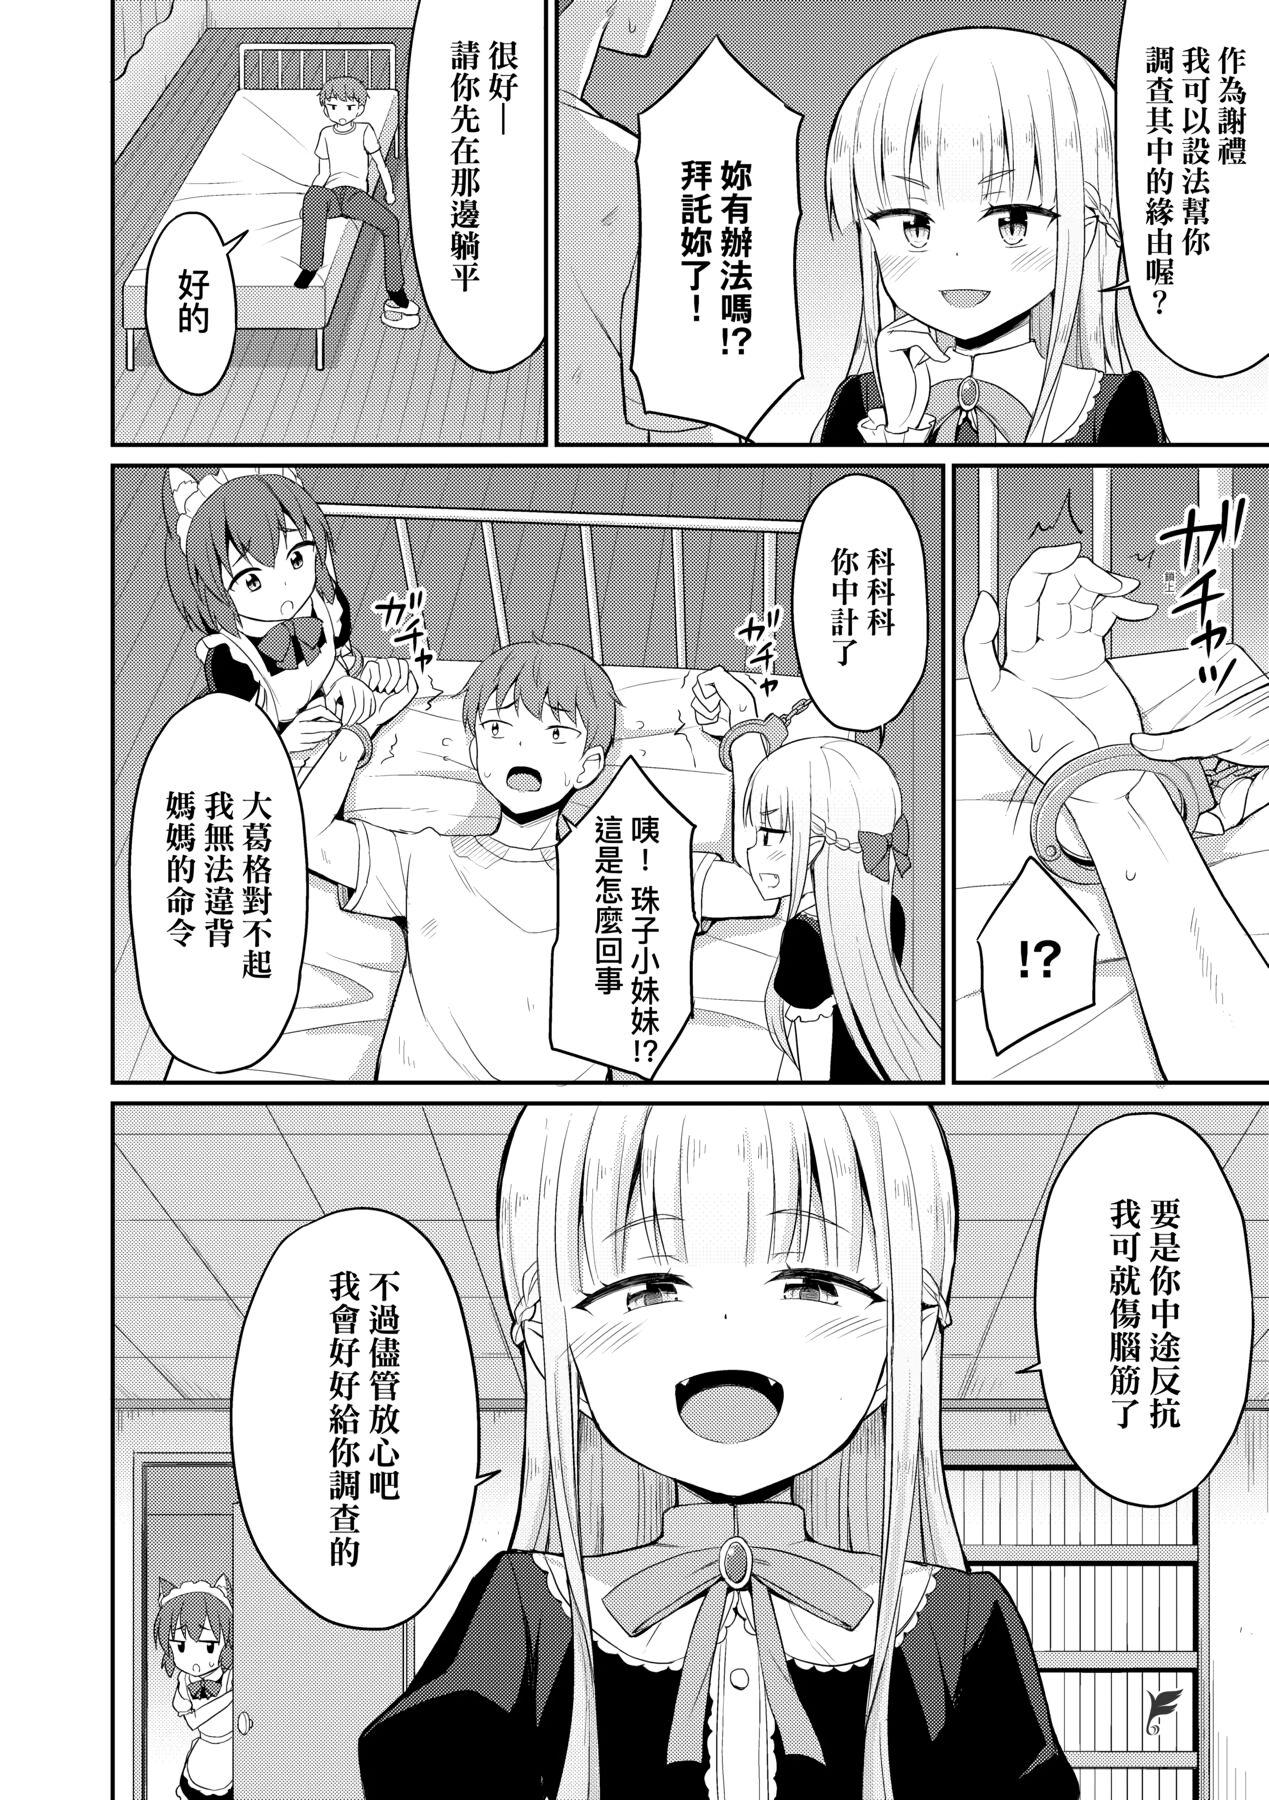 Long Hair Cafe Eternal e Youkoso! | 歡迎光臨咖啡永遠娘! 8teen - Page 11